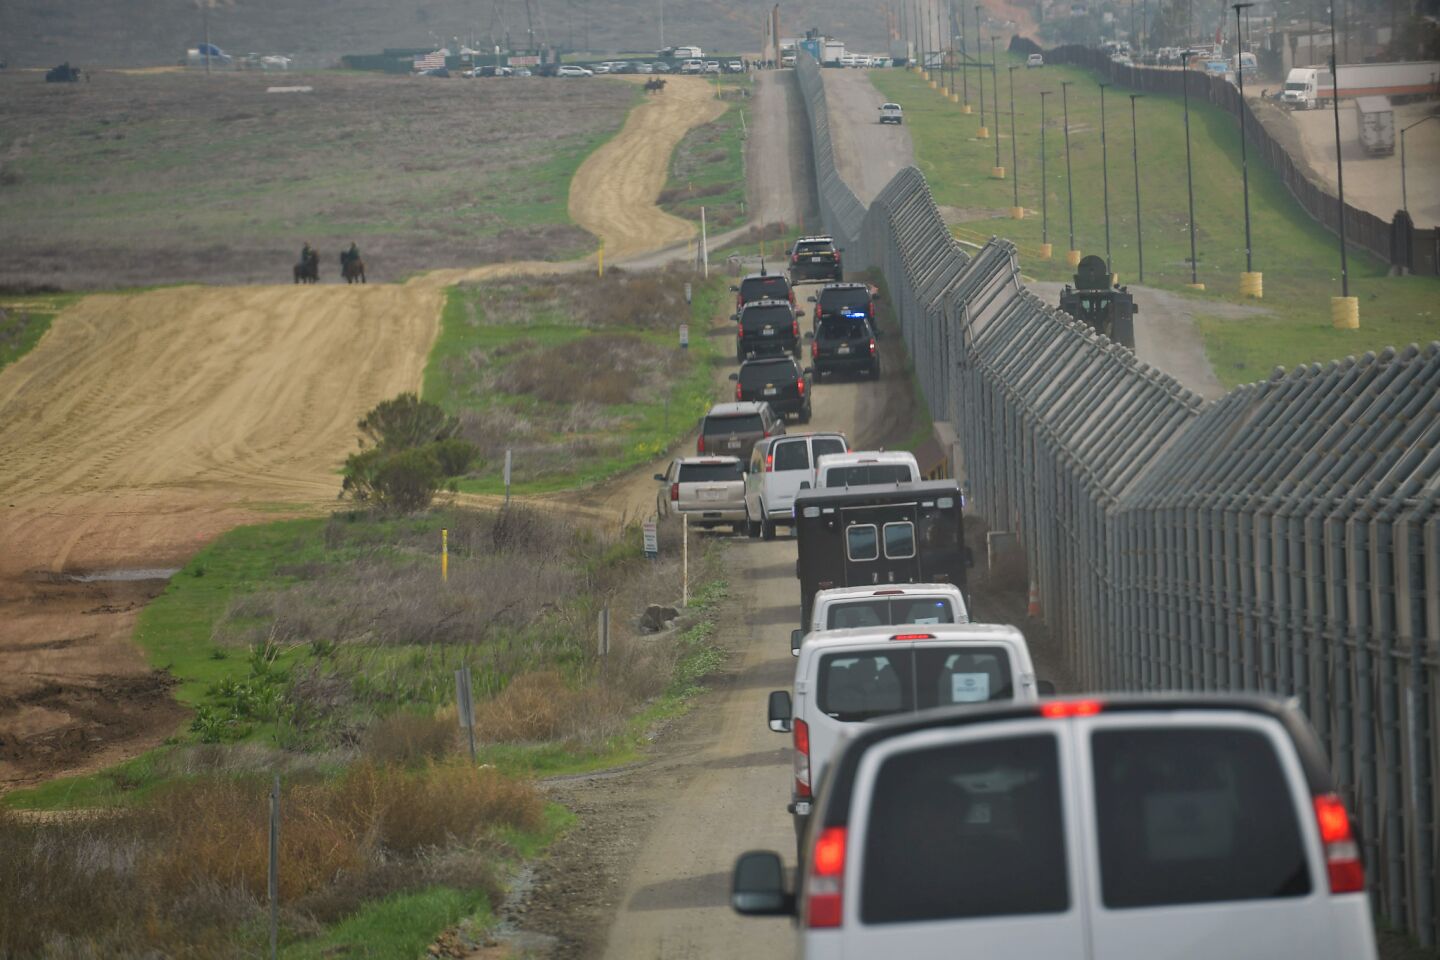 President Trump's motorcade makes its way along the border where he inspected wall prototypes near San Diego on March 13.